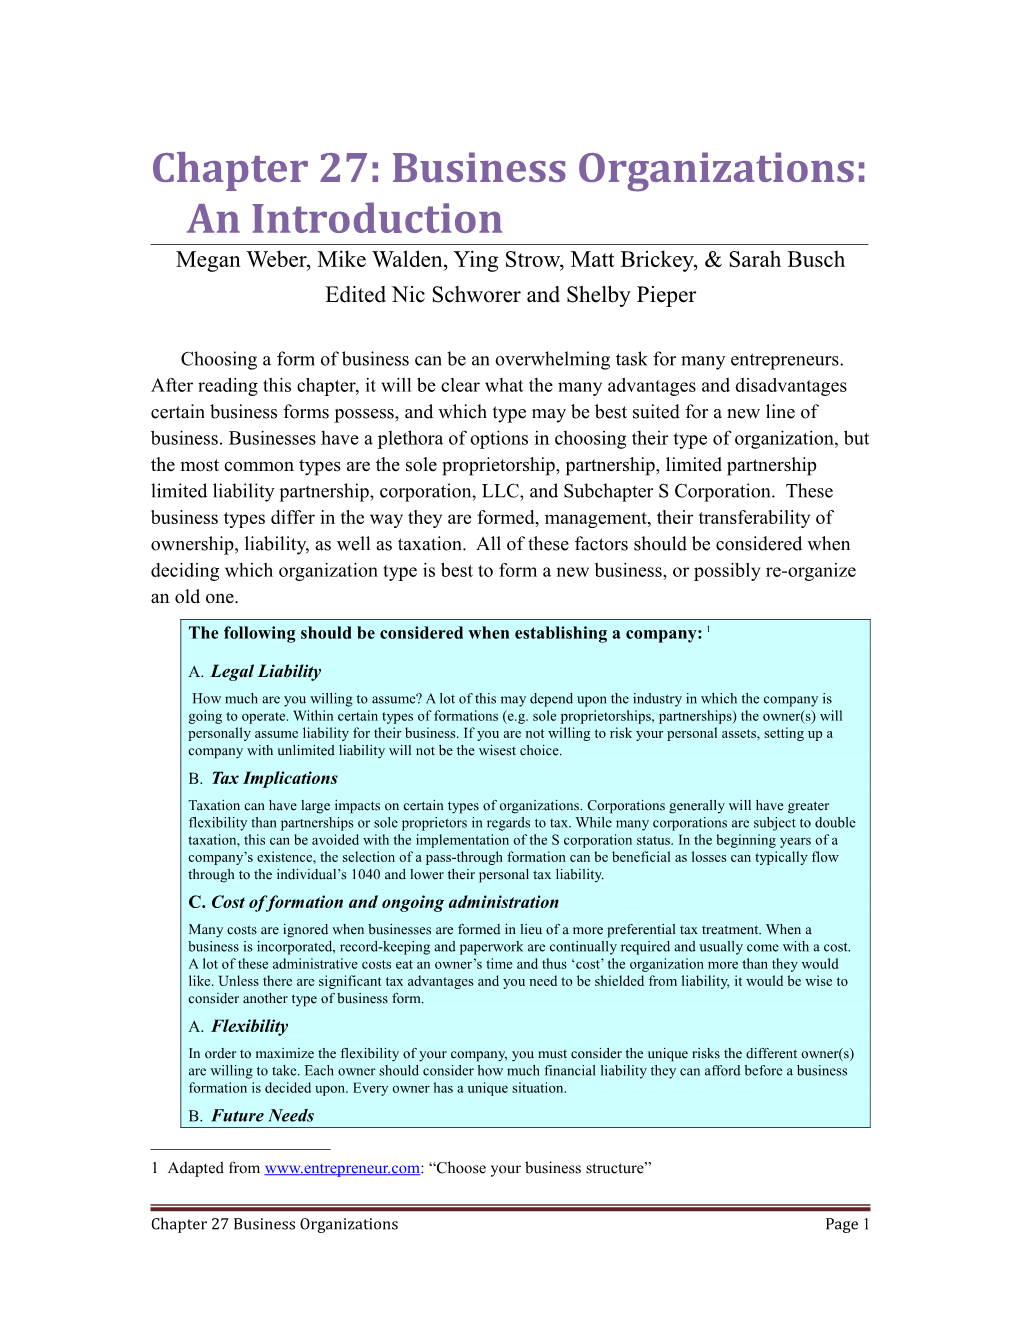 Chapter 27: Business Organizations: an Introduction